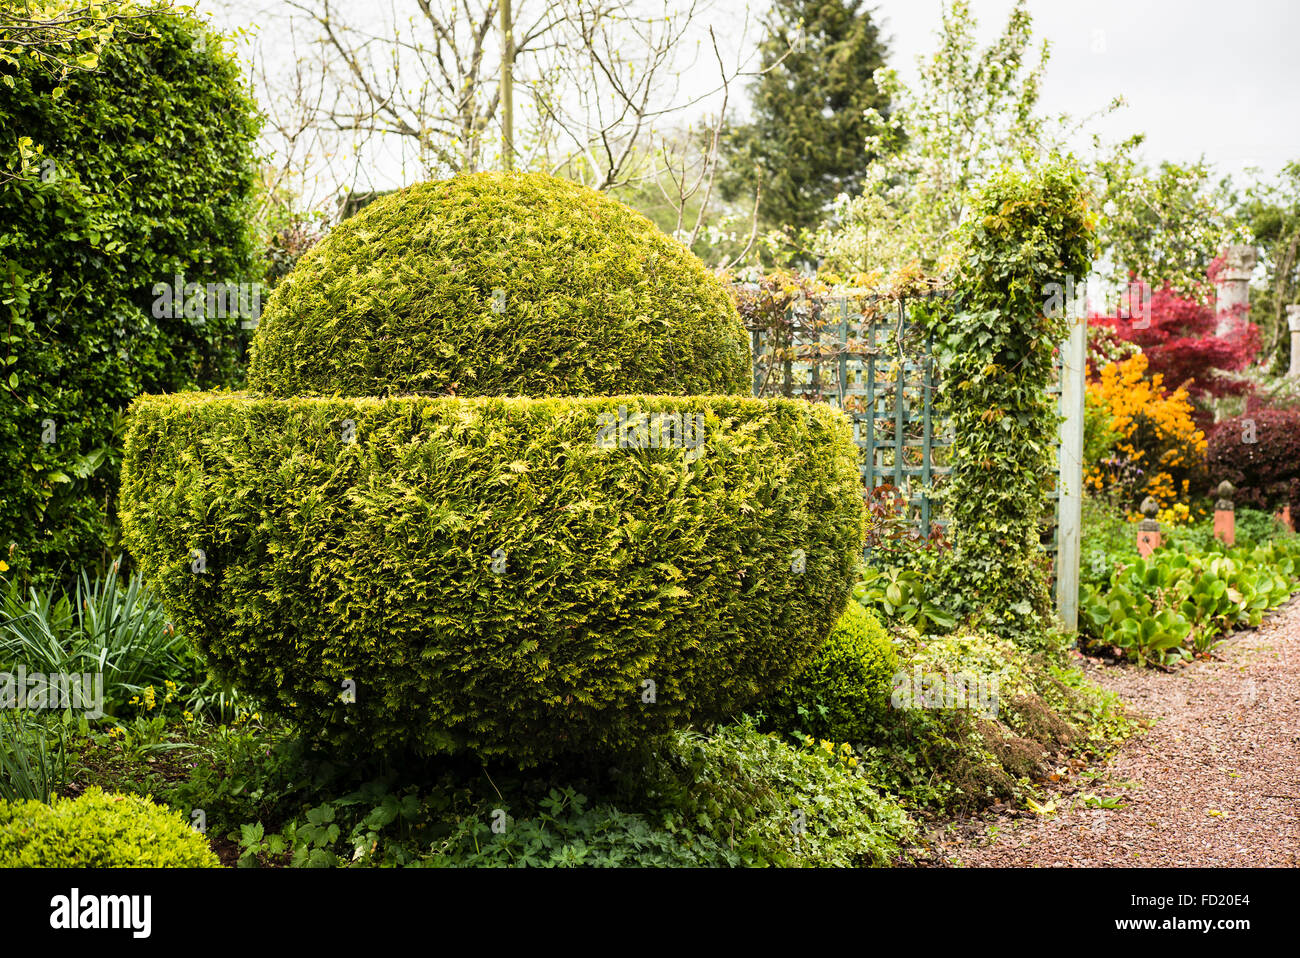 Neat topiary is a feature of The Laskett garden in Herefordshire UK Stock Photo